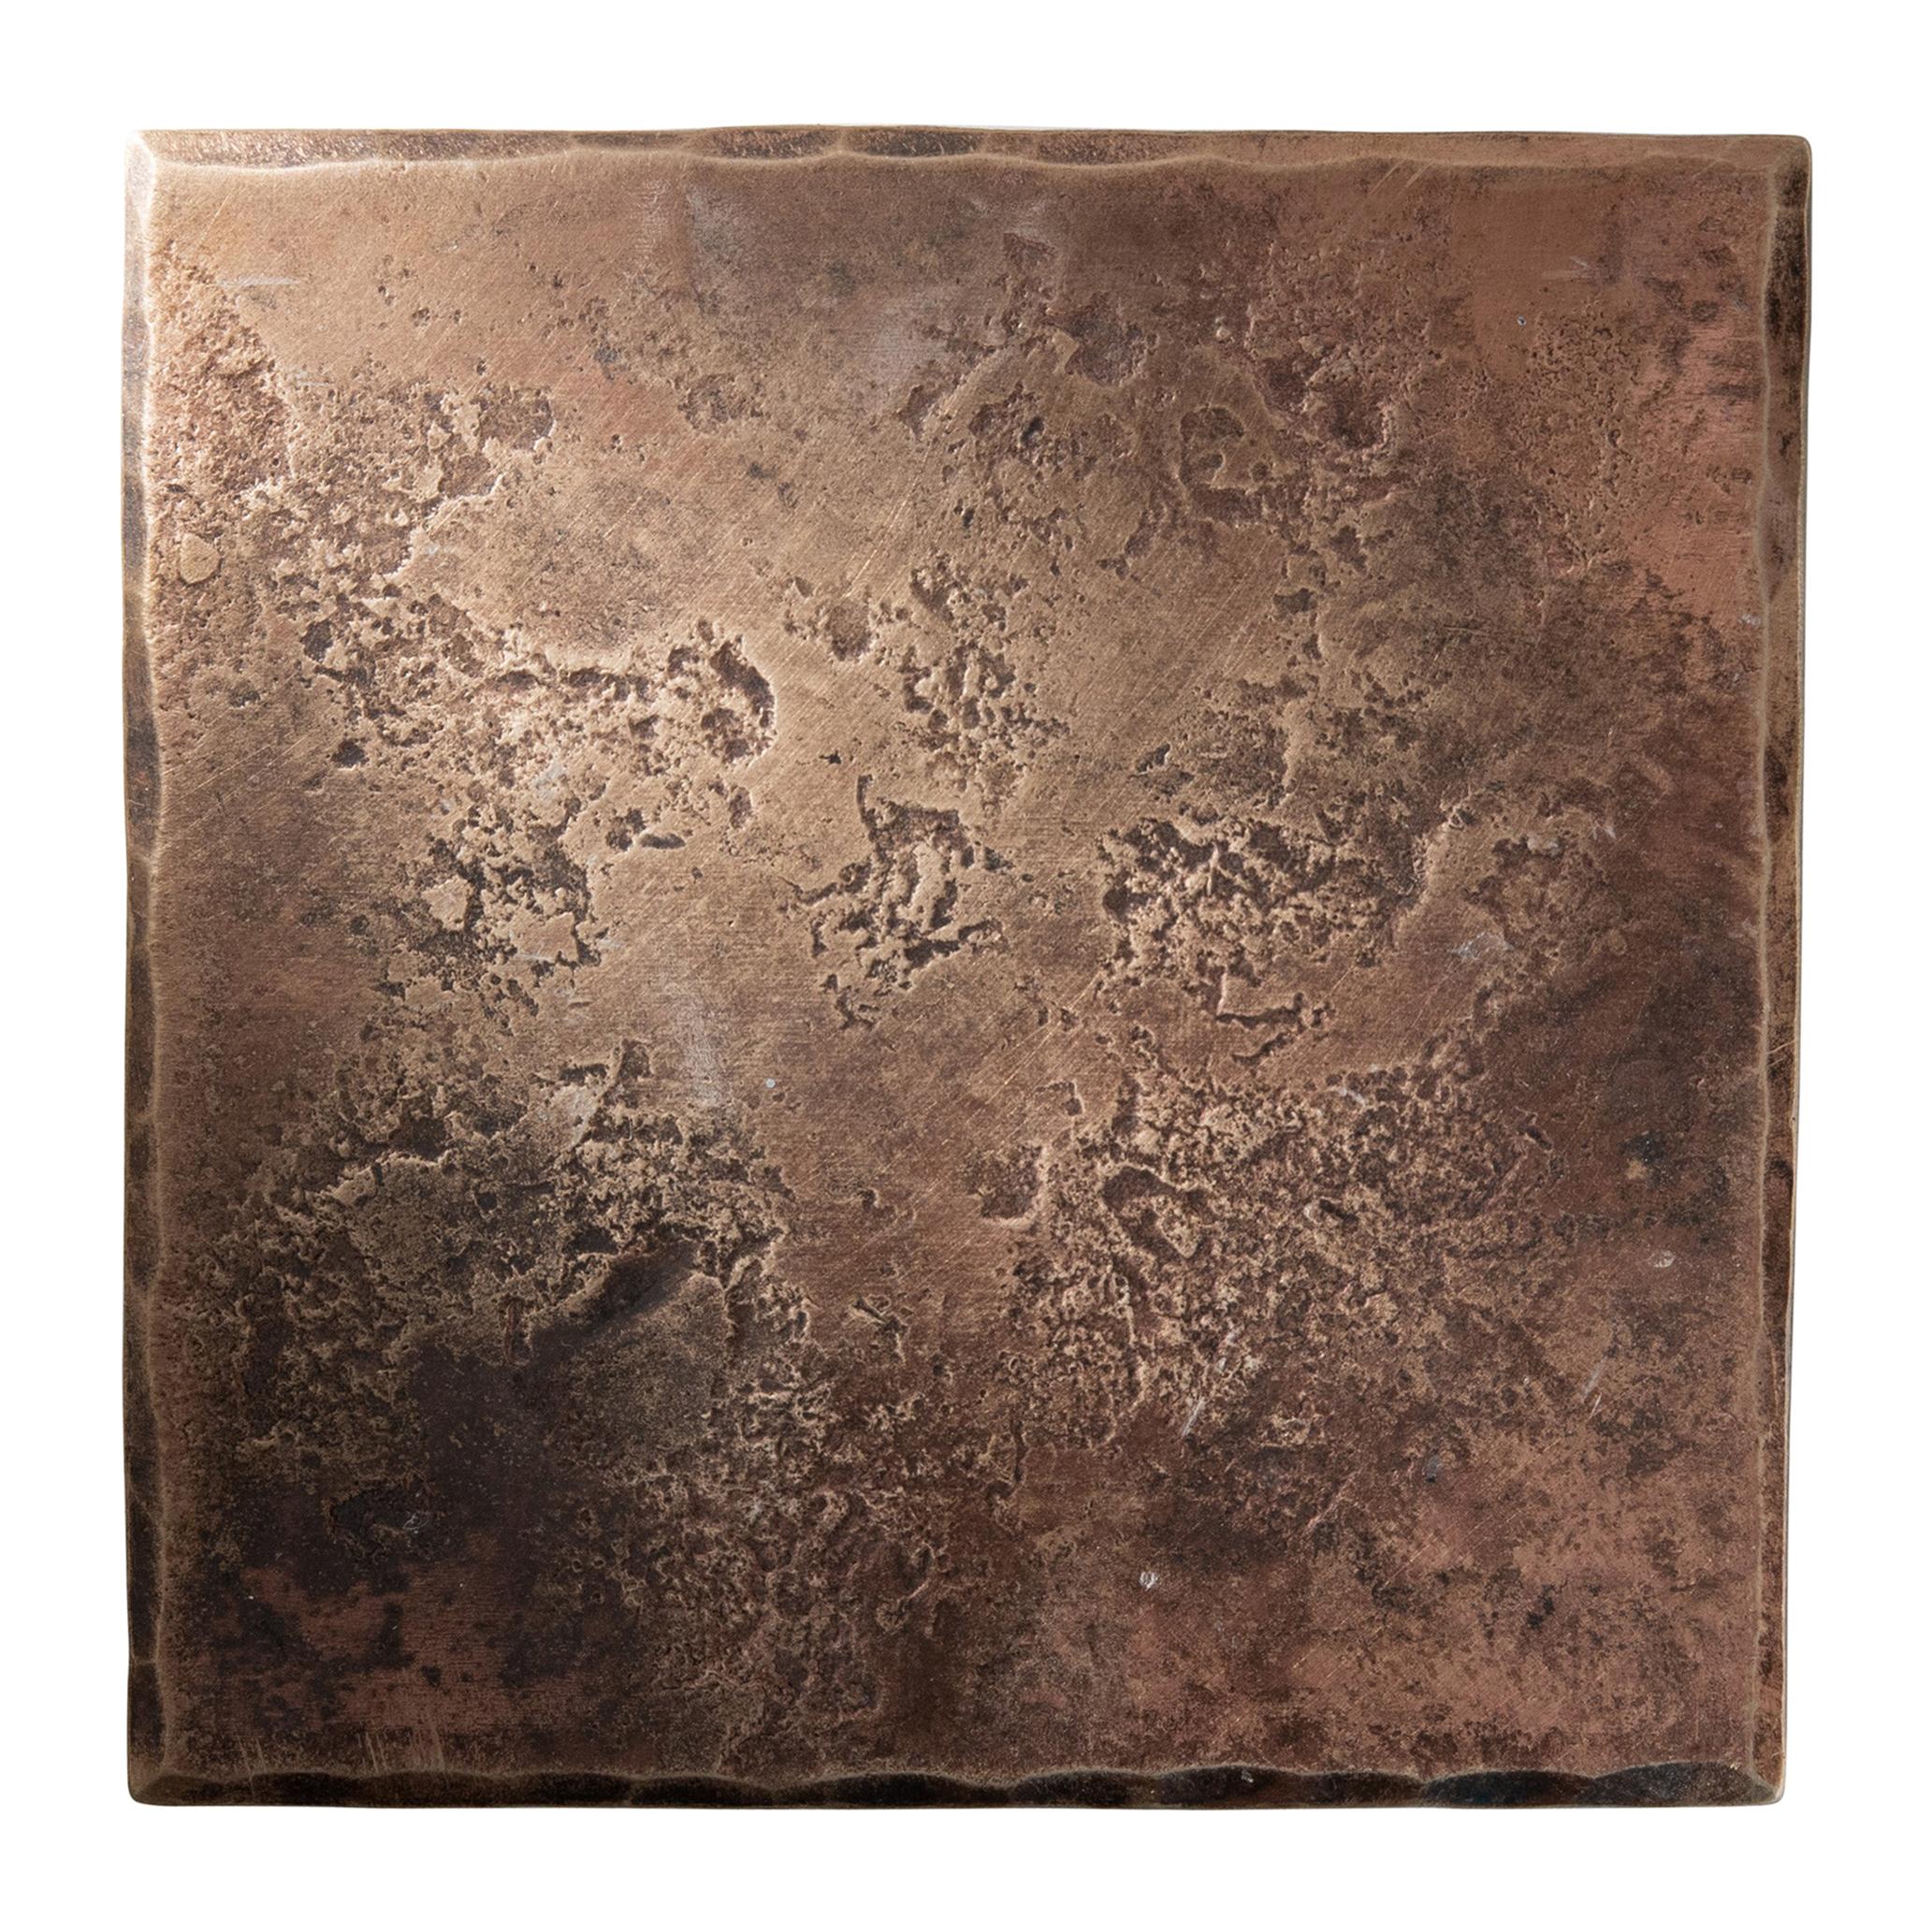 Forged Bronze Square Coaster with Hammered and Polished Finish